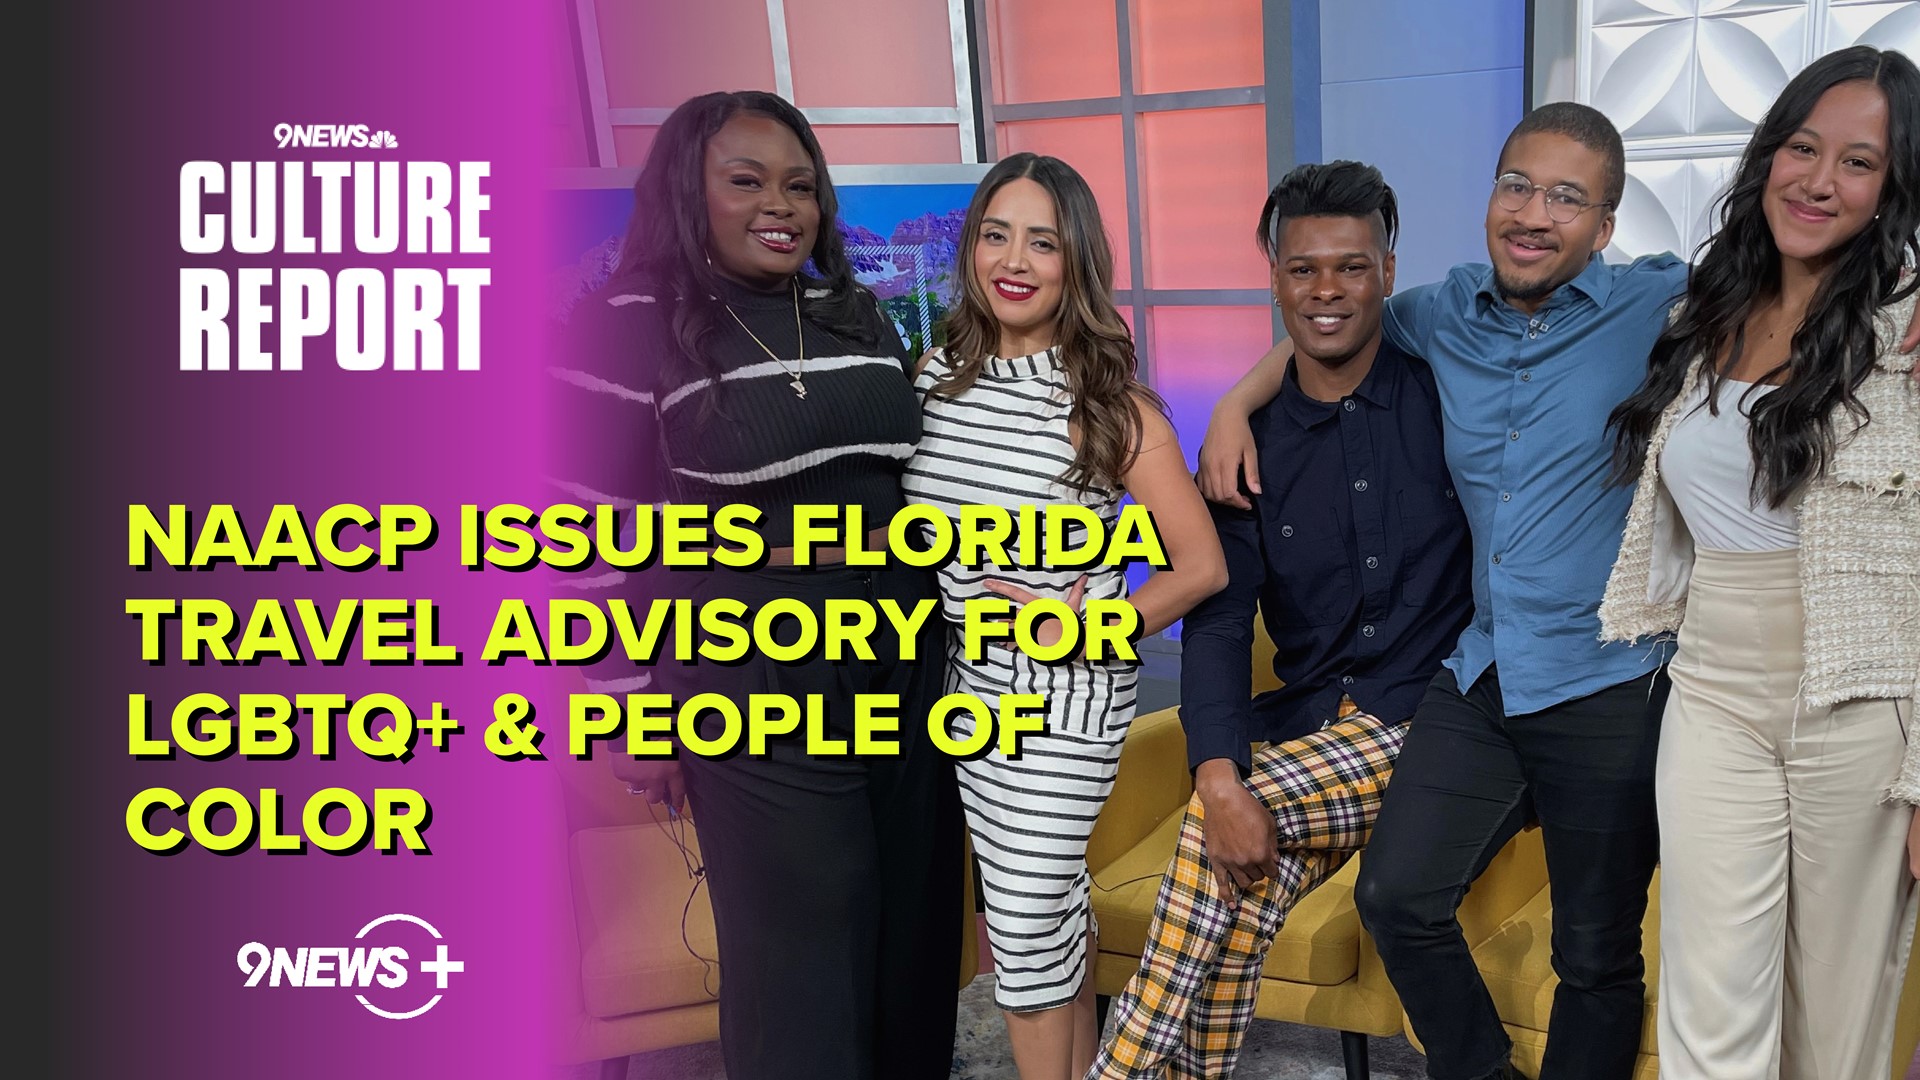 We also chat about the travel advisory the NAACP issued for Florida and a couple of cases of people from Puerto Rico having their drivers' licenses denied.